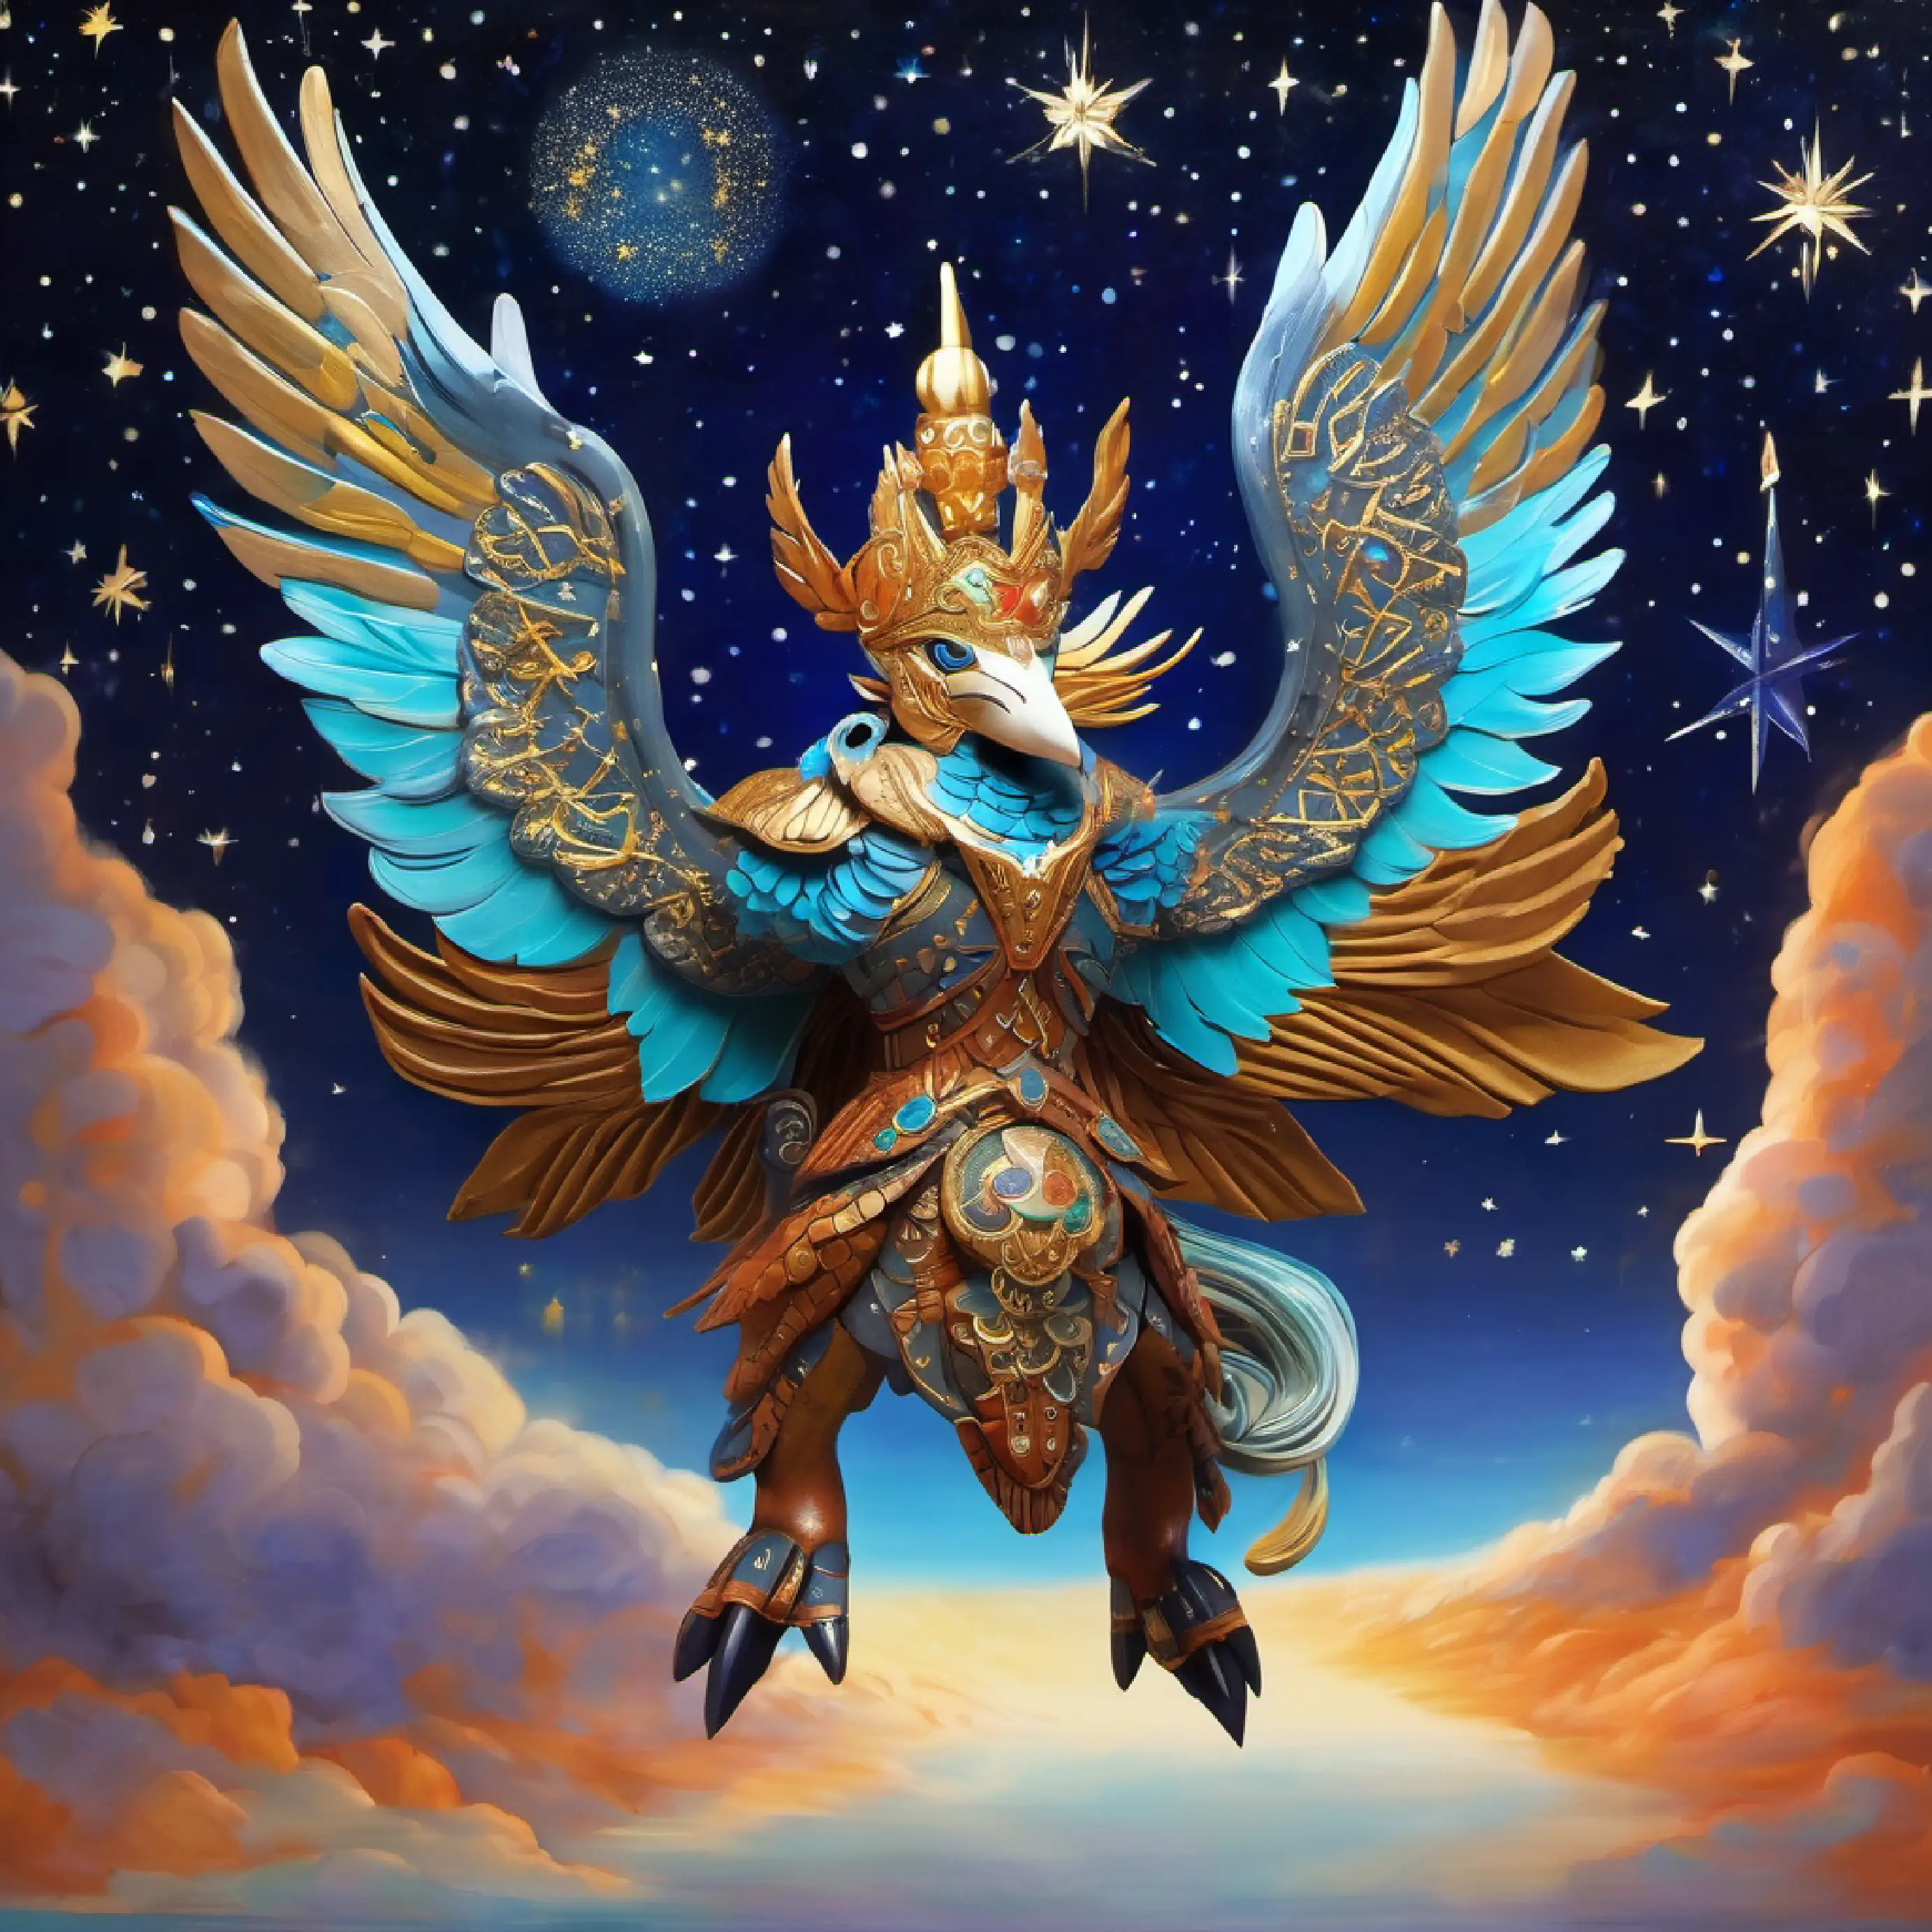 "Conjure an image of Garuda, the celestial navigator, ascending beyond the mortal realms, his wings bathed in the ethereal glow of the Milky Way. Clad in celestial armor that mirrors the night sky, studded with stars, his helmet a crown of cosmic fire, he carries the prayers of the faithful to the heavens. Around him, constellations tell tales of his heroism, as he flies towards the realm of the gods, a bridge between Earth and the divine."